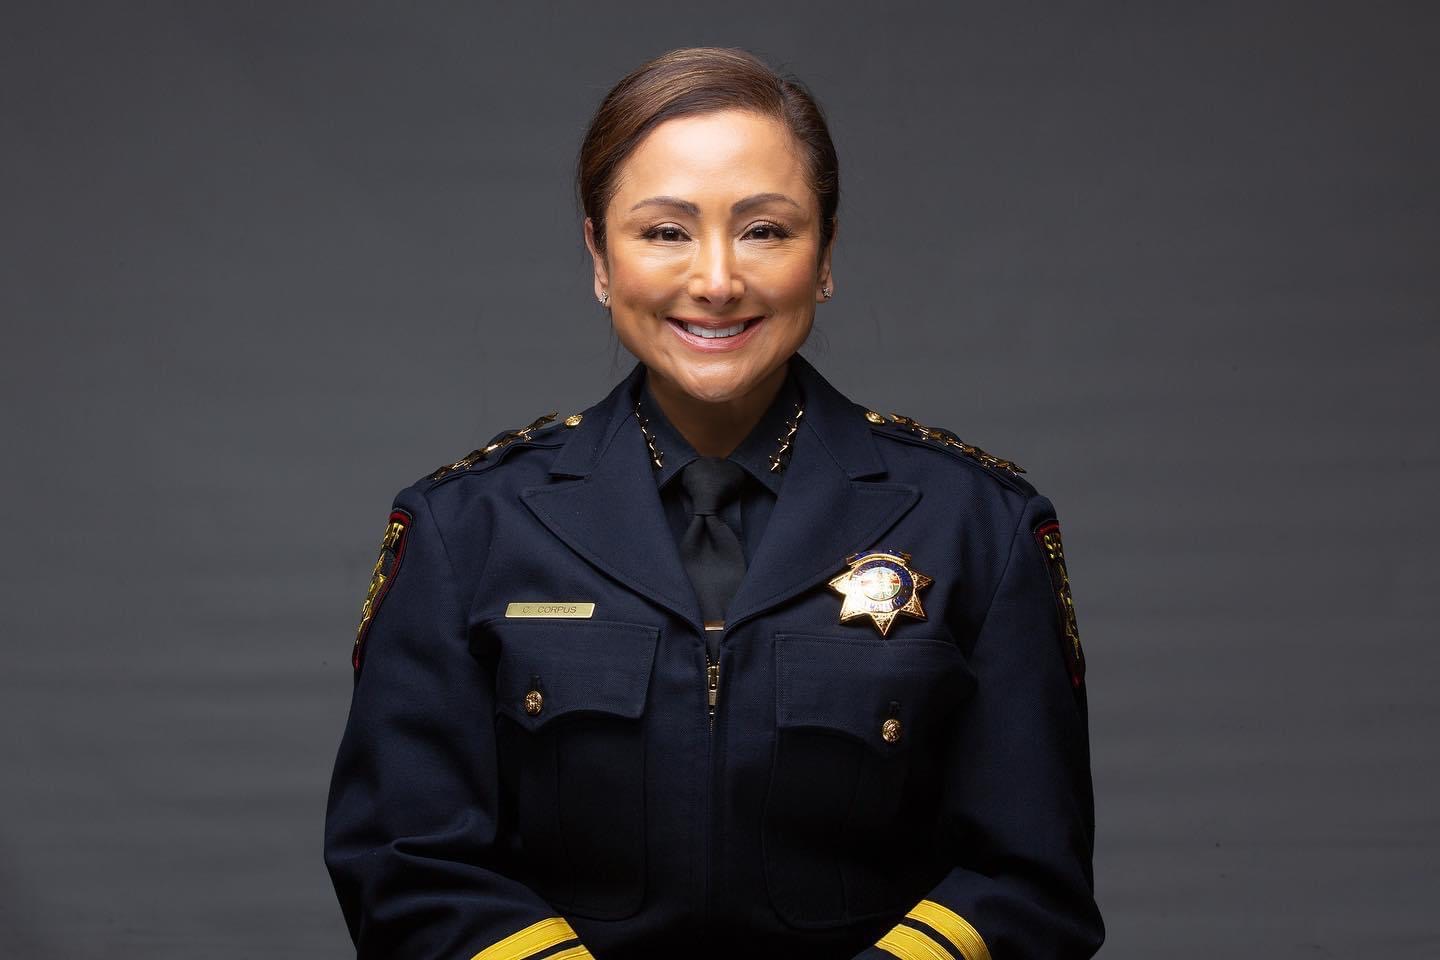 San Mateo County Sheriff Christina Corpus stated that the Half Moon Bay mass shooting was "a workplace violence incident"